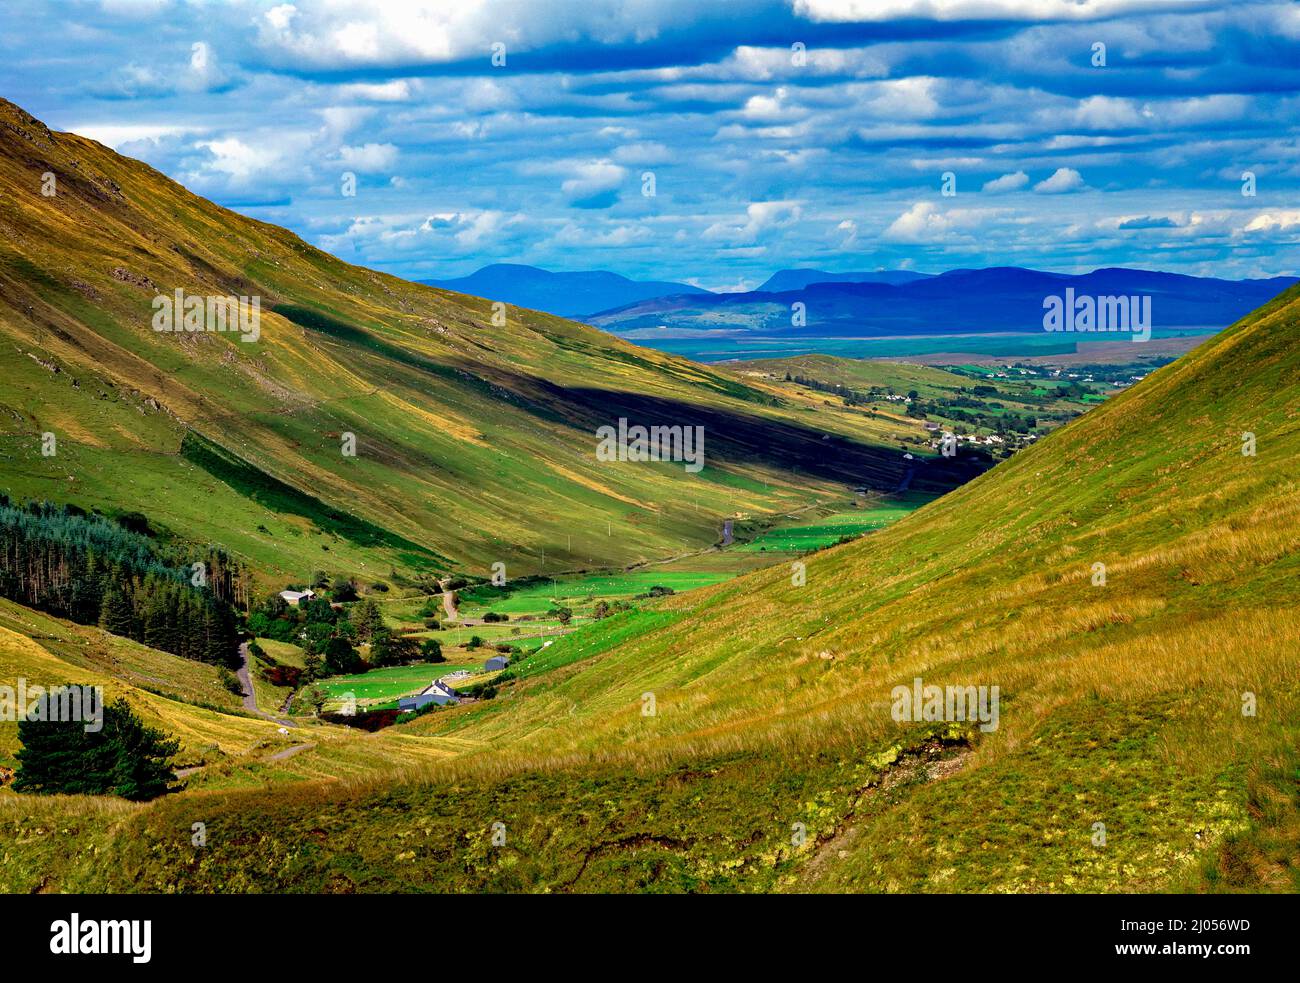 View from the Glengesh viewing point looking towards Ardara, County Donegal, Ireland Stock Photo